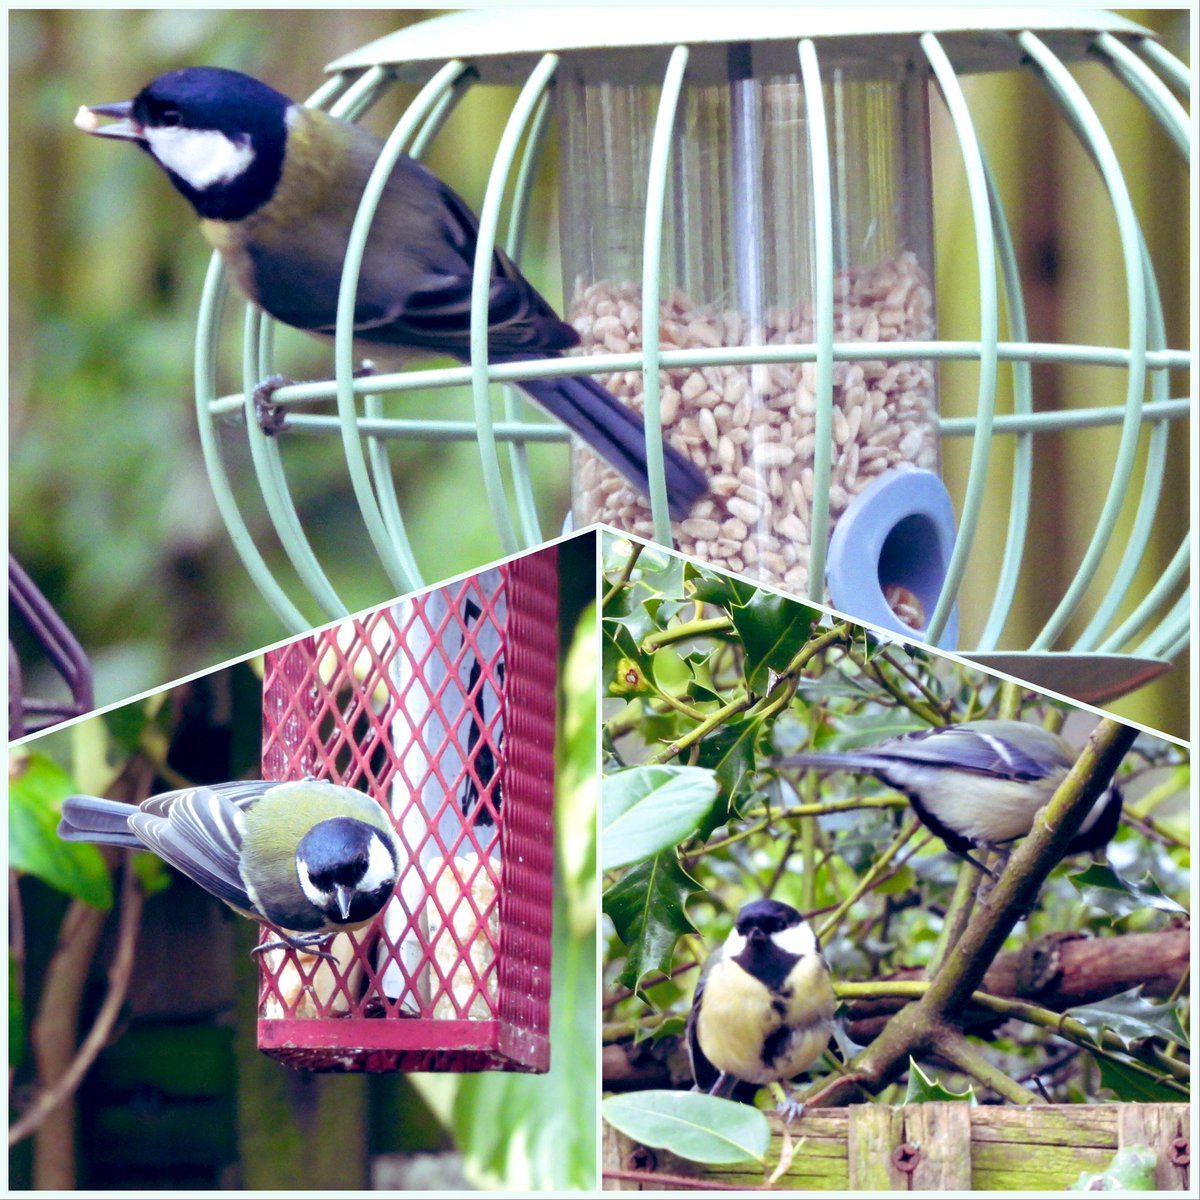 A few highlights from my #gardenbirdwatch today. Was thrilled fo see a pair of Dunnocks. Great Tits, Blue Tits, Long-tailed Tit, Coal Tits, Chaffinch.Three Robins had a clash & three Blackbirds seemed to be the optimum number for tolerance as well. And well, the Wren made my day!